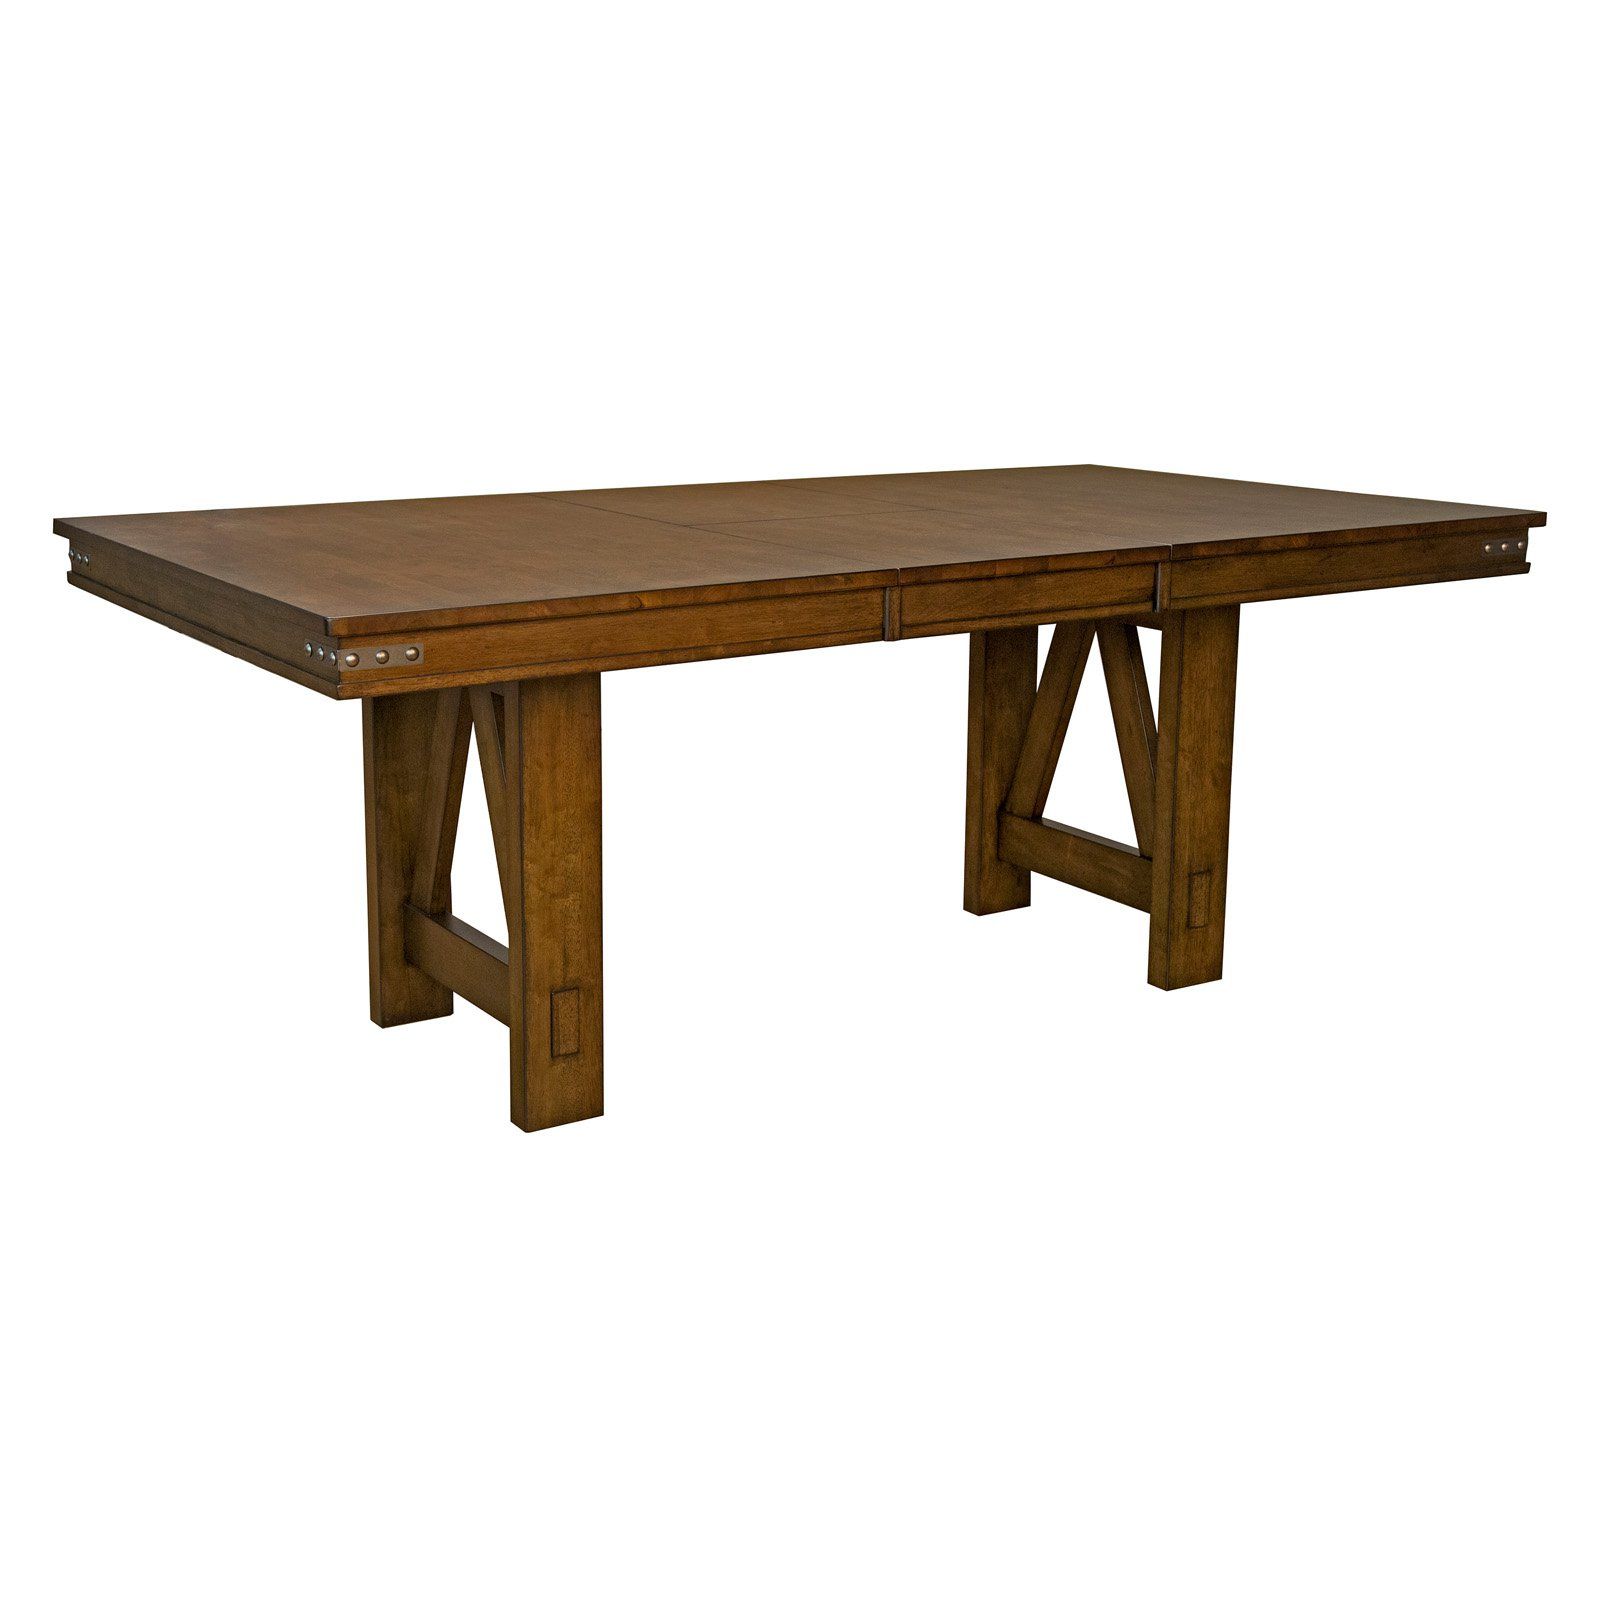 A America Eastwood Trestle Dining Table – Walmart Regarding Trendy Trestle Dining Tables (View 1 of 20)